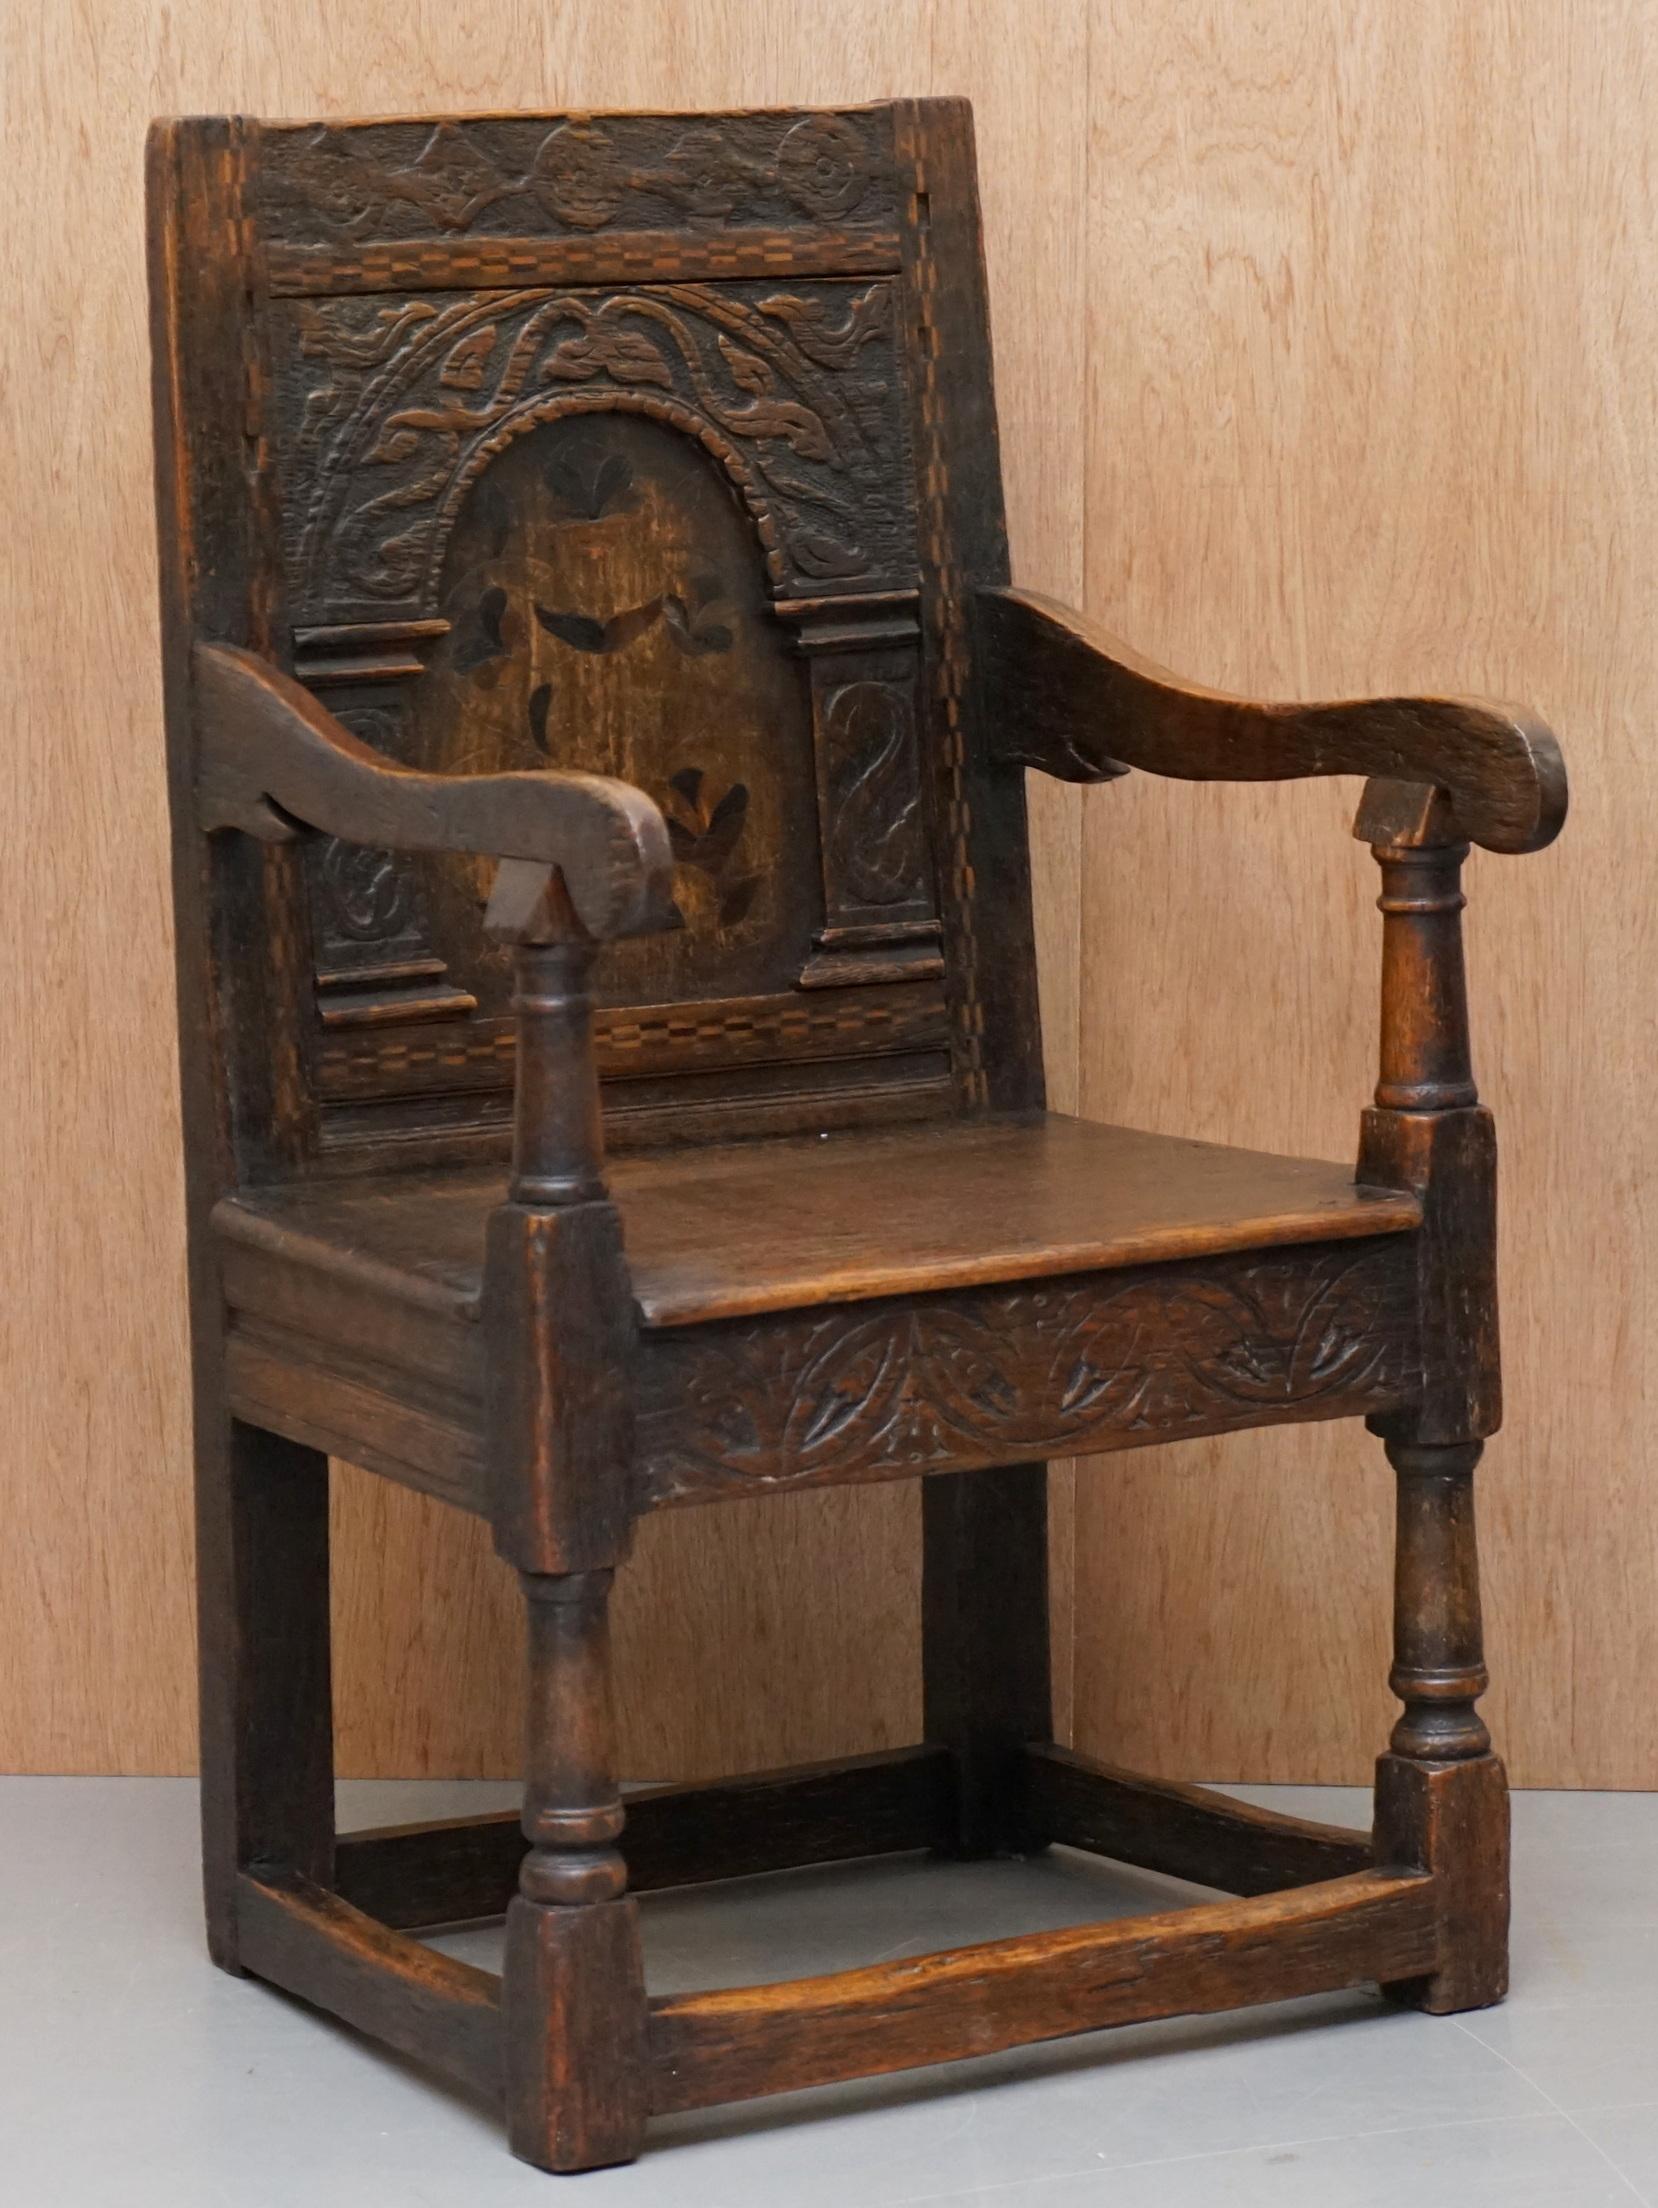 We are delighted to offer for sale this original early 17th century Charles I Wainscot armchair

A good early original piece, hand carved, very naïve but at the time this would have been considered very ornate. The chair has some kind of inlay